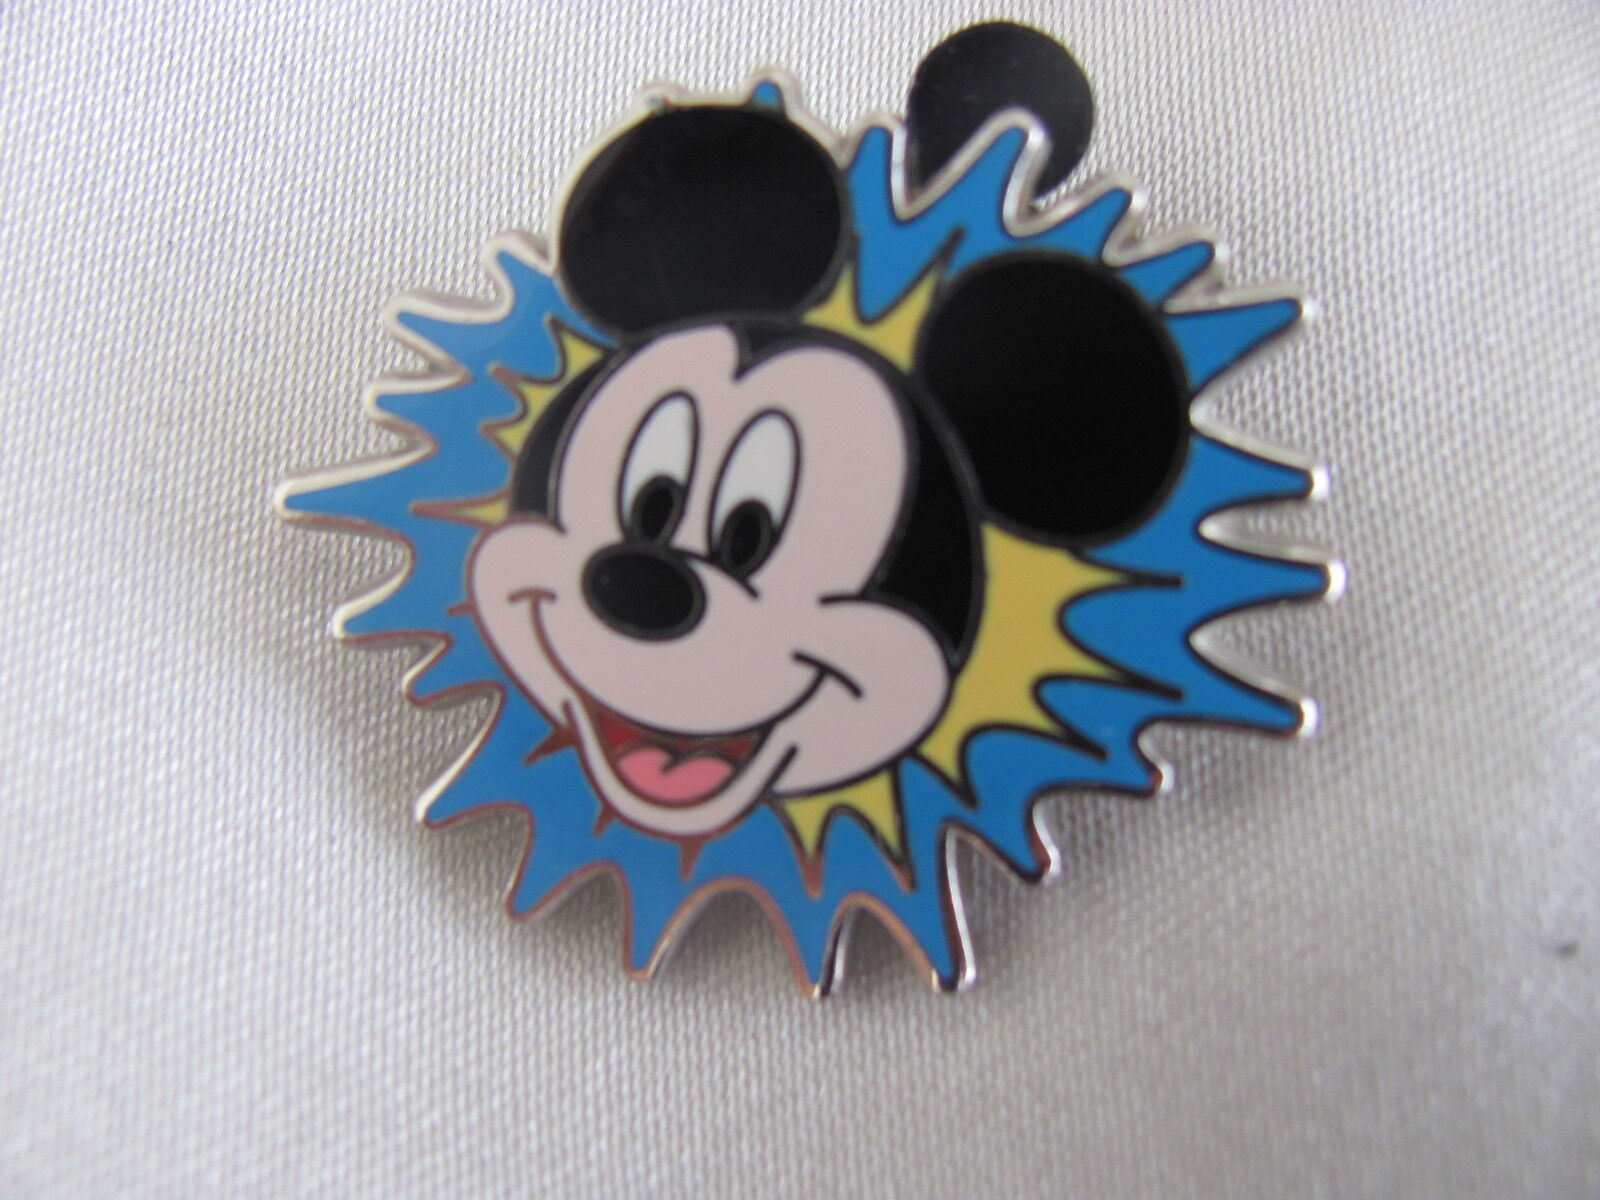 Primary image for Disney Trading Pins 74206: 2010 Mini-Pin Collection - Mickey Mouse Only